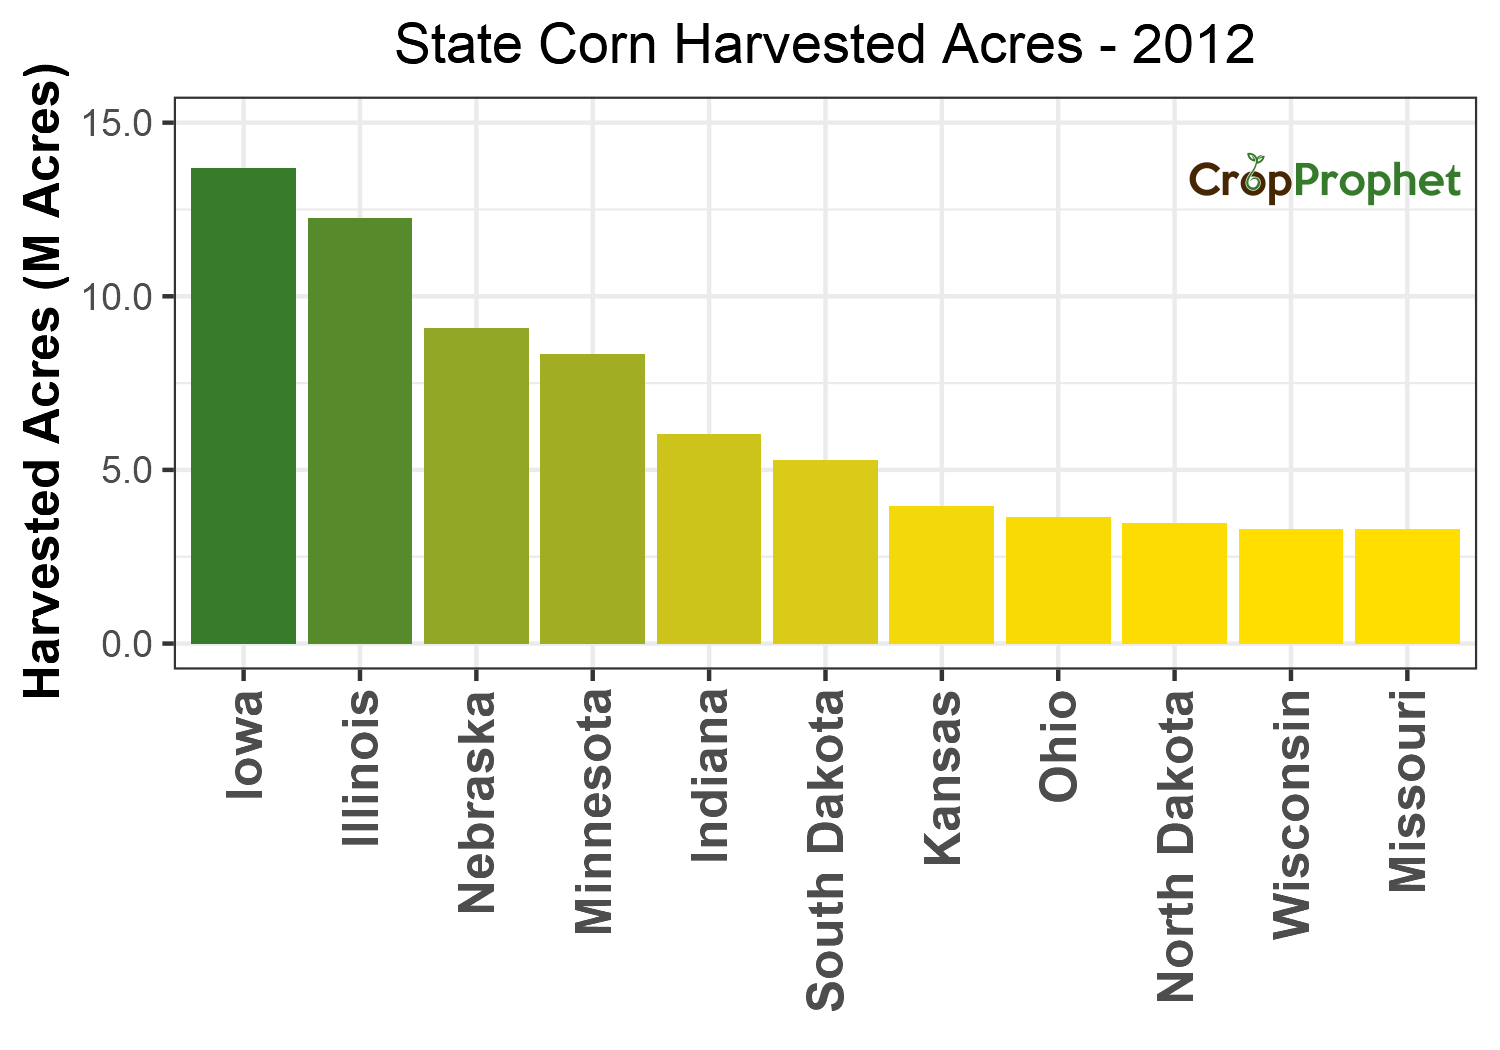 Corn Harvested Acres by State - 2012 Rankings